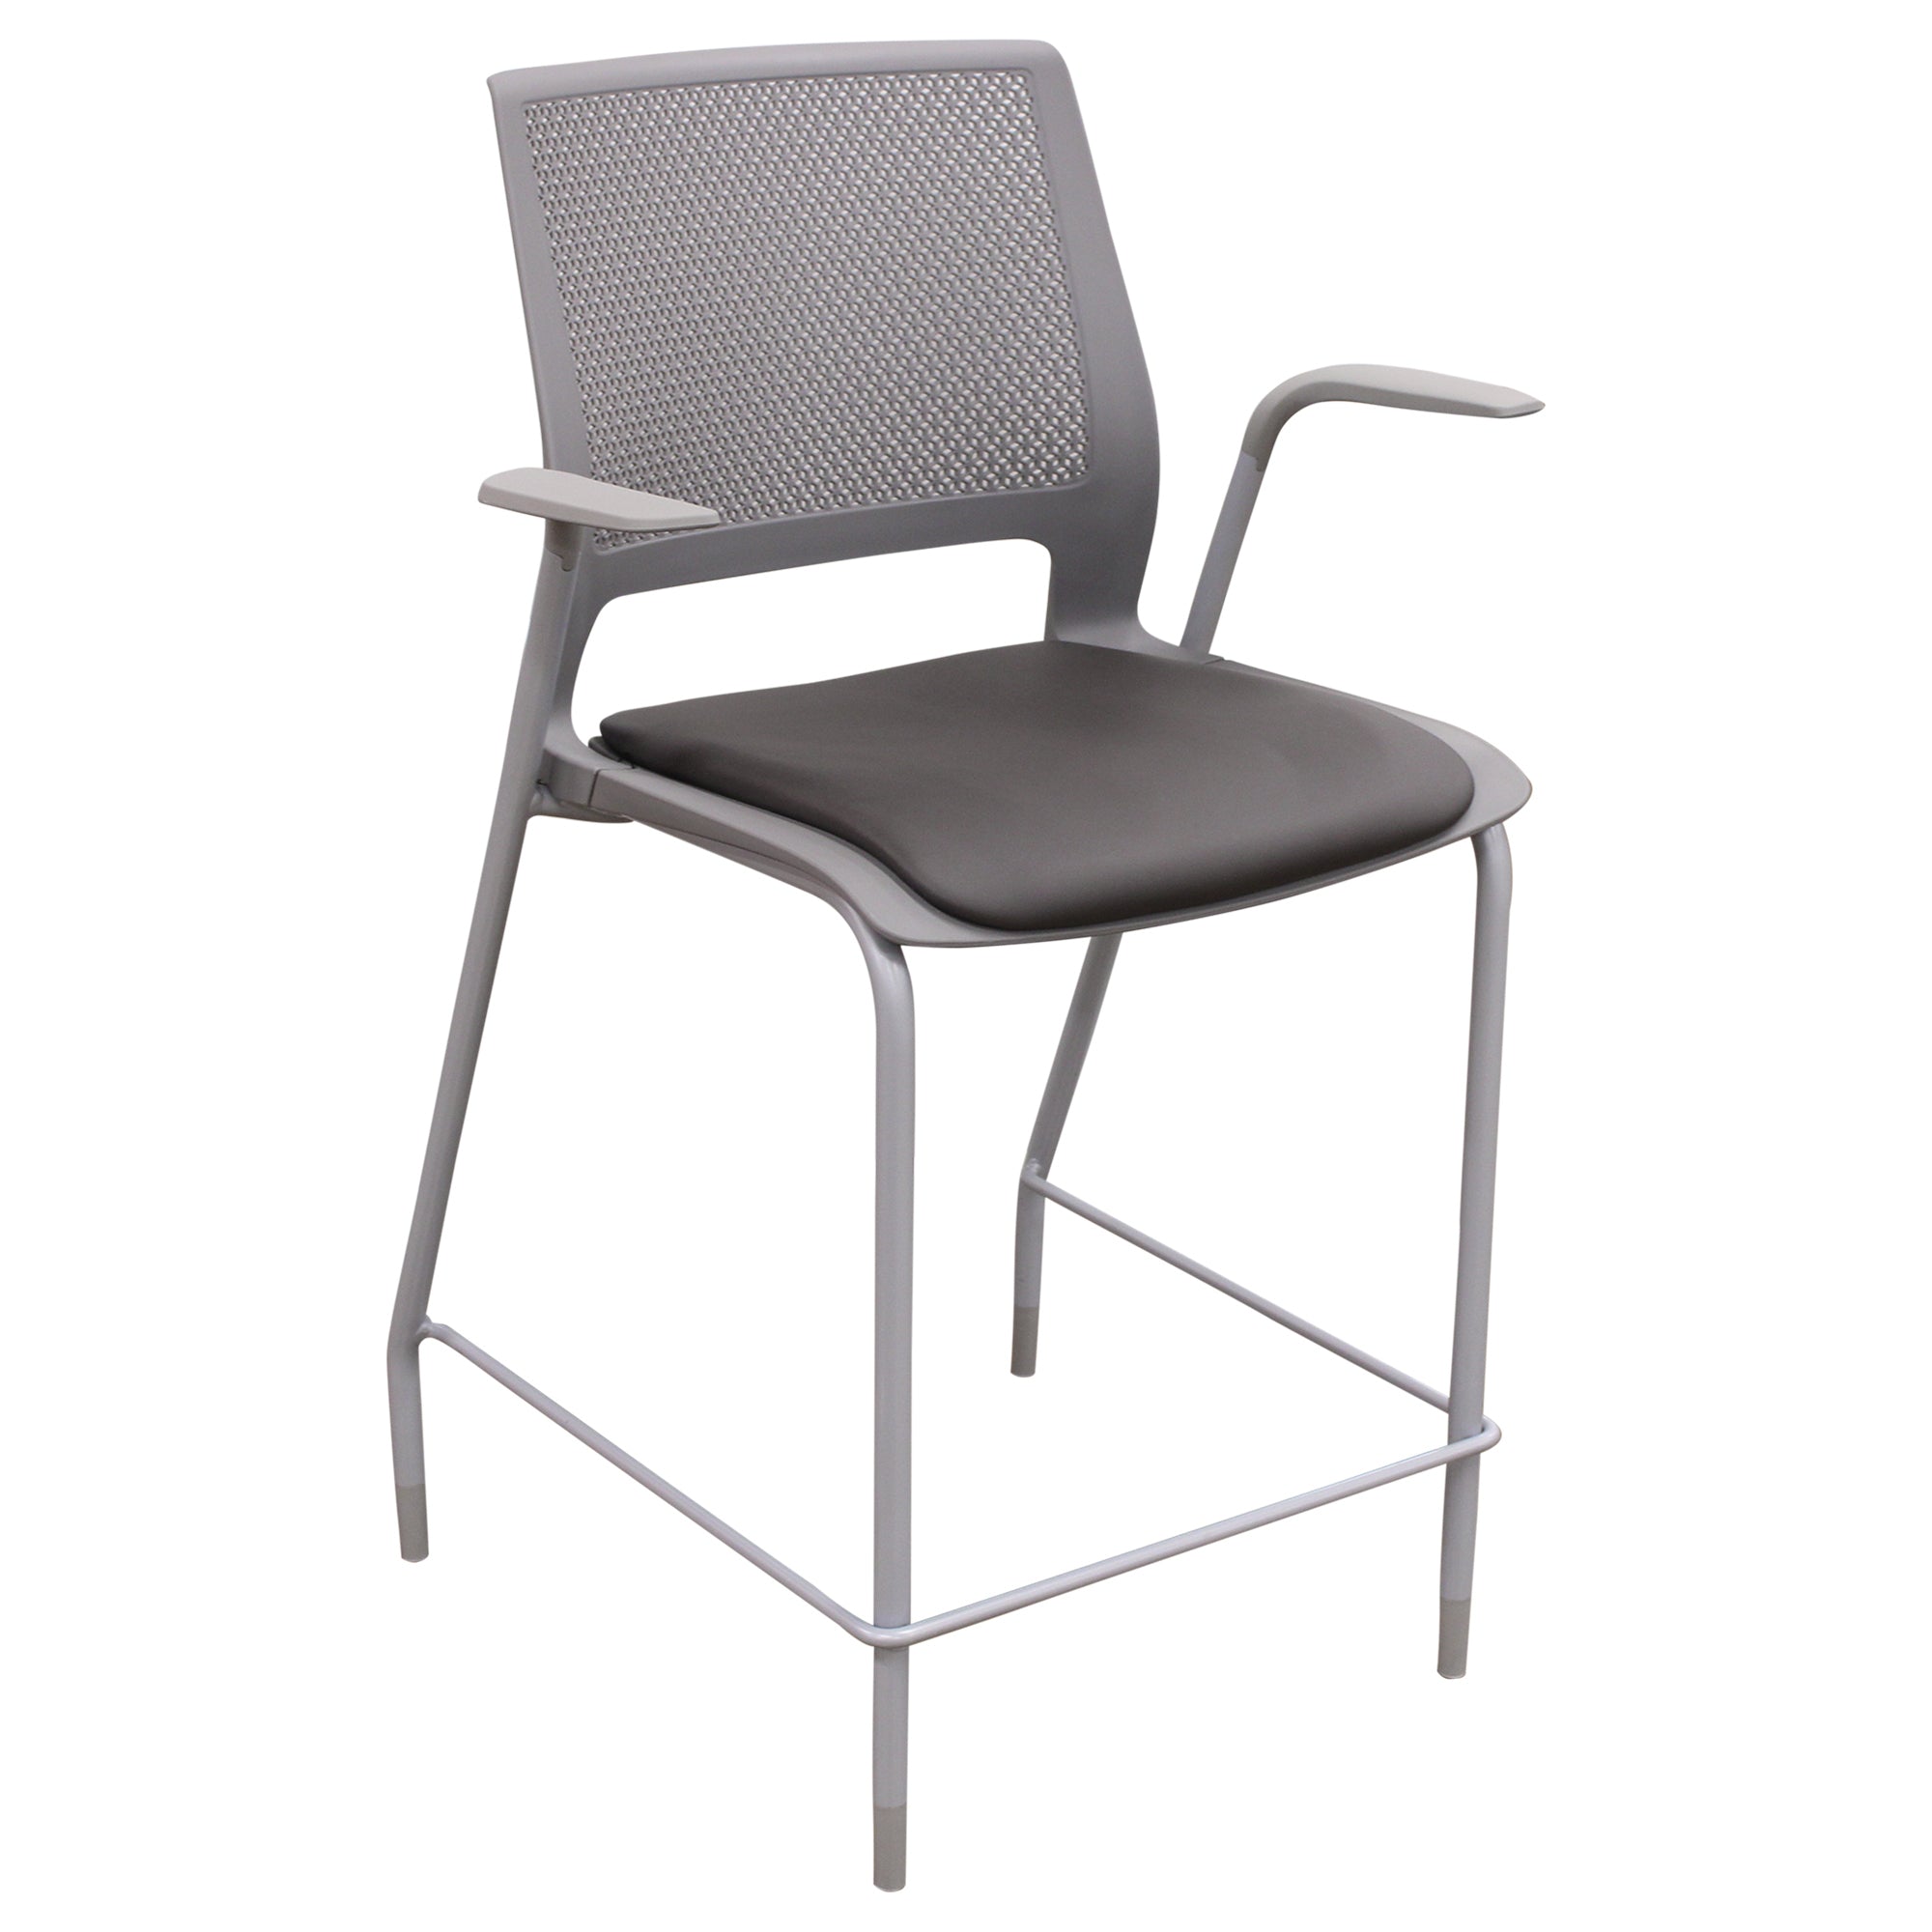 SitOnIt Lumin Counter Height Stool, Grey - Preowned